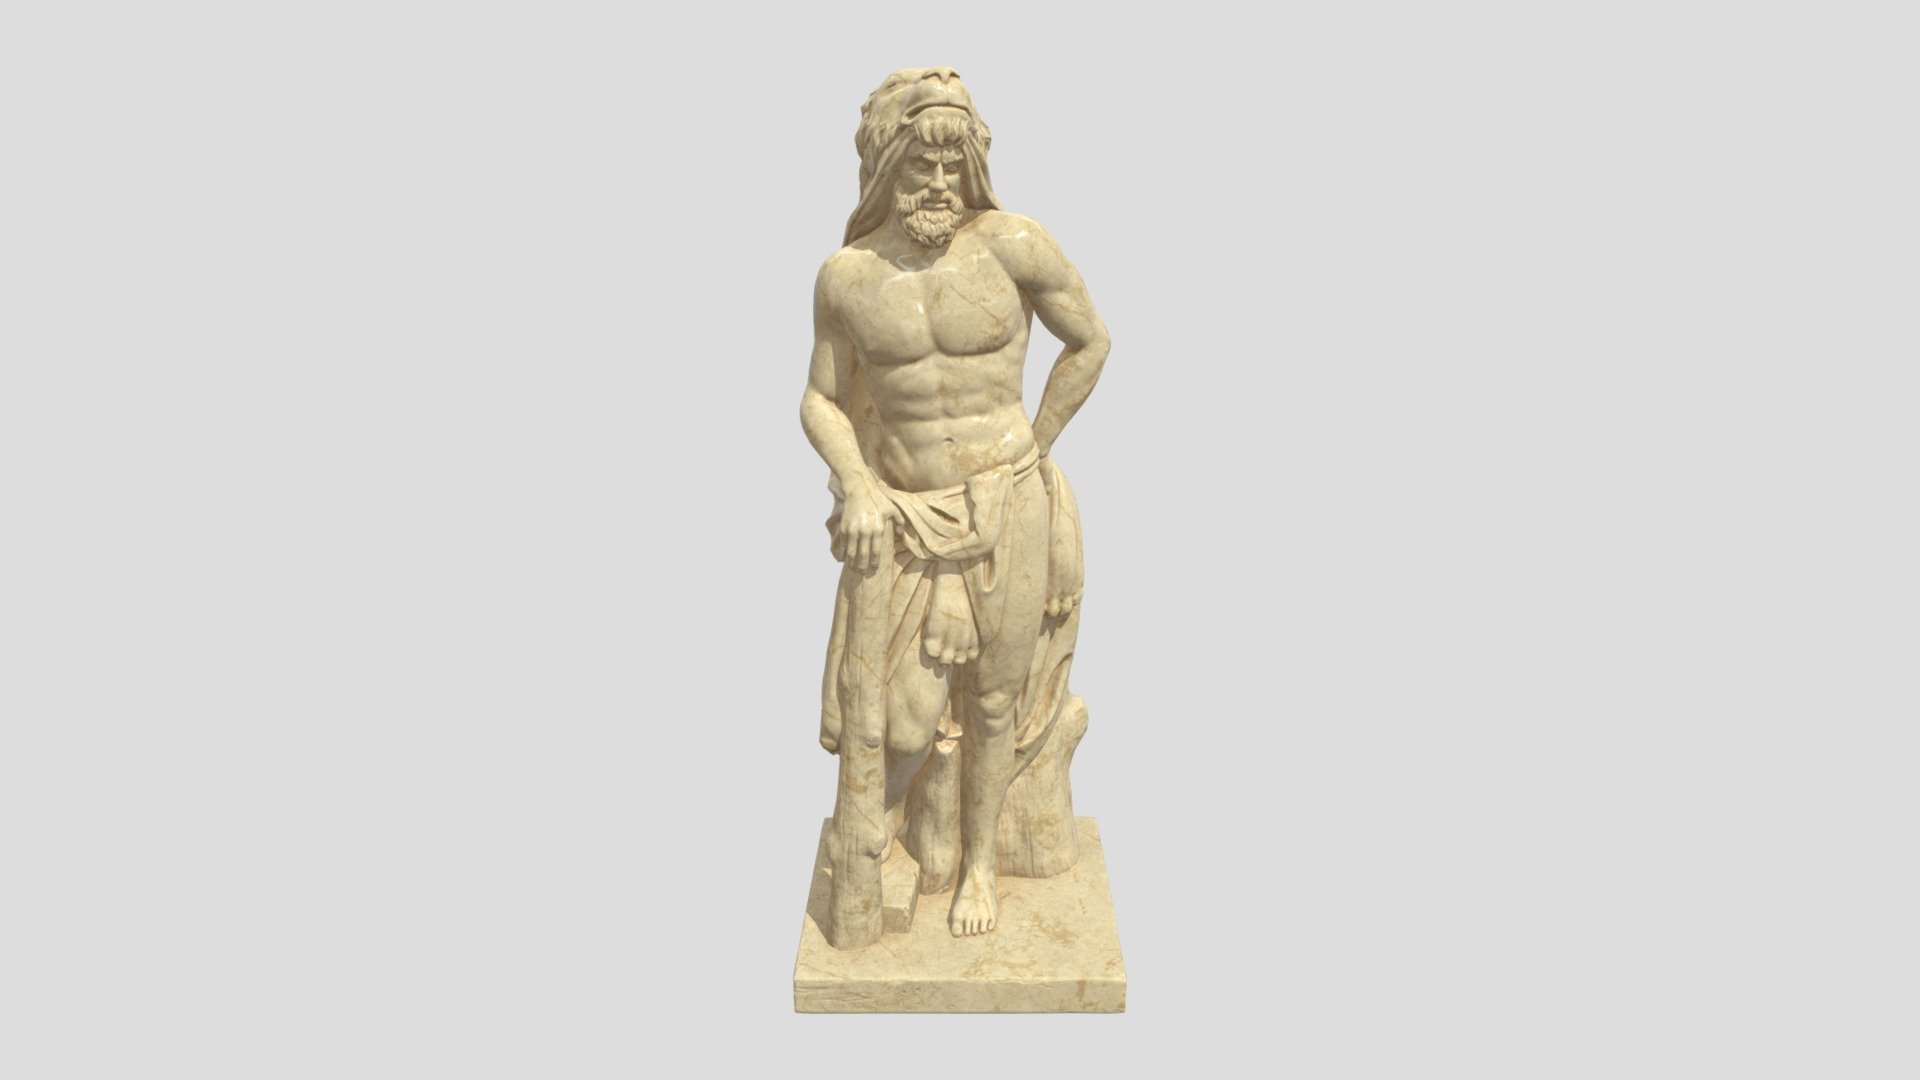 Hercules is the famous Greek Hero half-man, half-god, endowed with a superhuman strength, that accomplishes the 12 labors, imposed by Eurystheus his cousin. Model Realised from a real 2 meter statue as reference.

Hercules Statue Low Poly made in 3ds max. Ready for game and engine.
The renders are made in Keyshot. Model with marble textures .png (2048x2048) : Diffuse, Normals and Roughness. Polycounts: 21k Model Format : Max (2014), Obj, Fbx.

Enjoy :) - Hercules Greek Statue - 3D model by brice.R 3d model